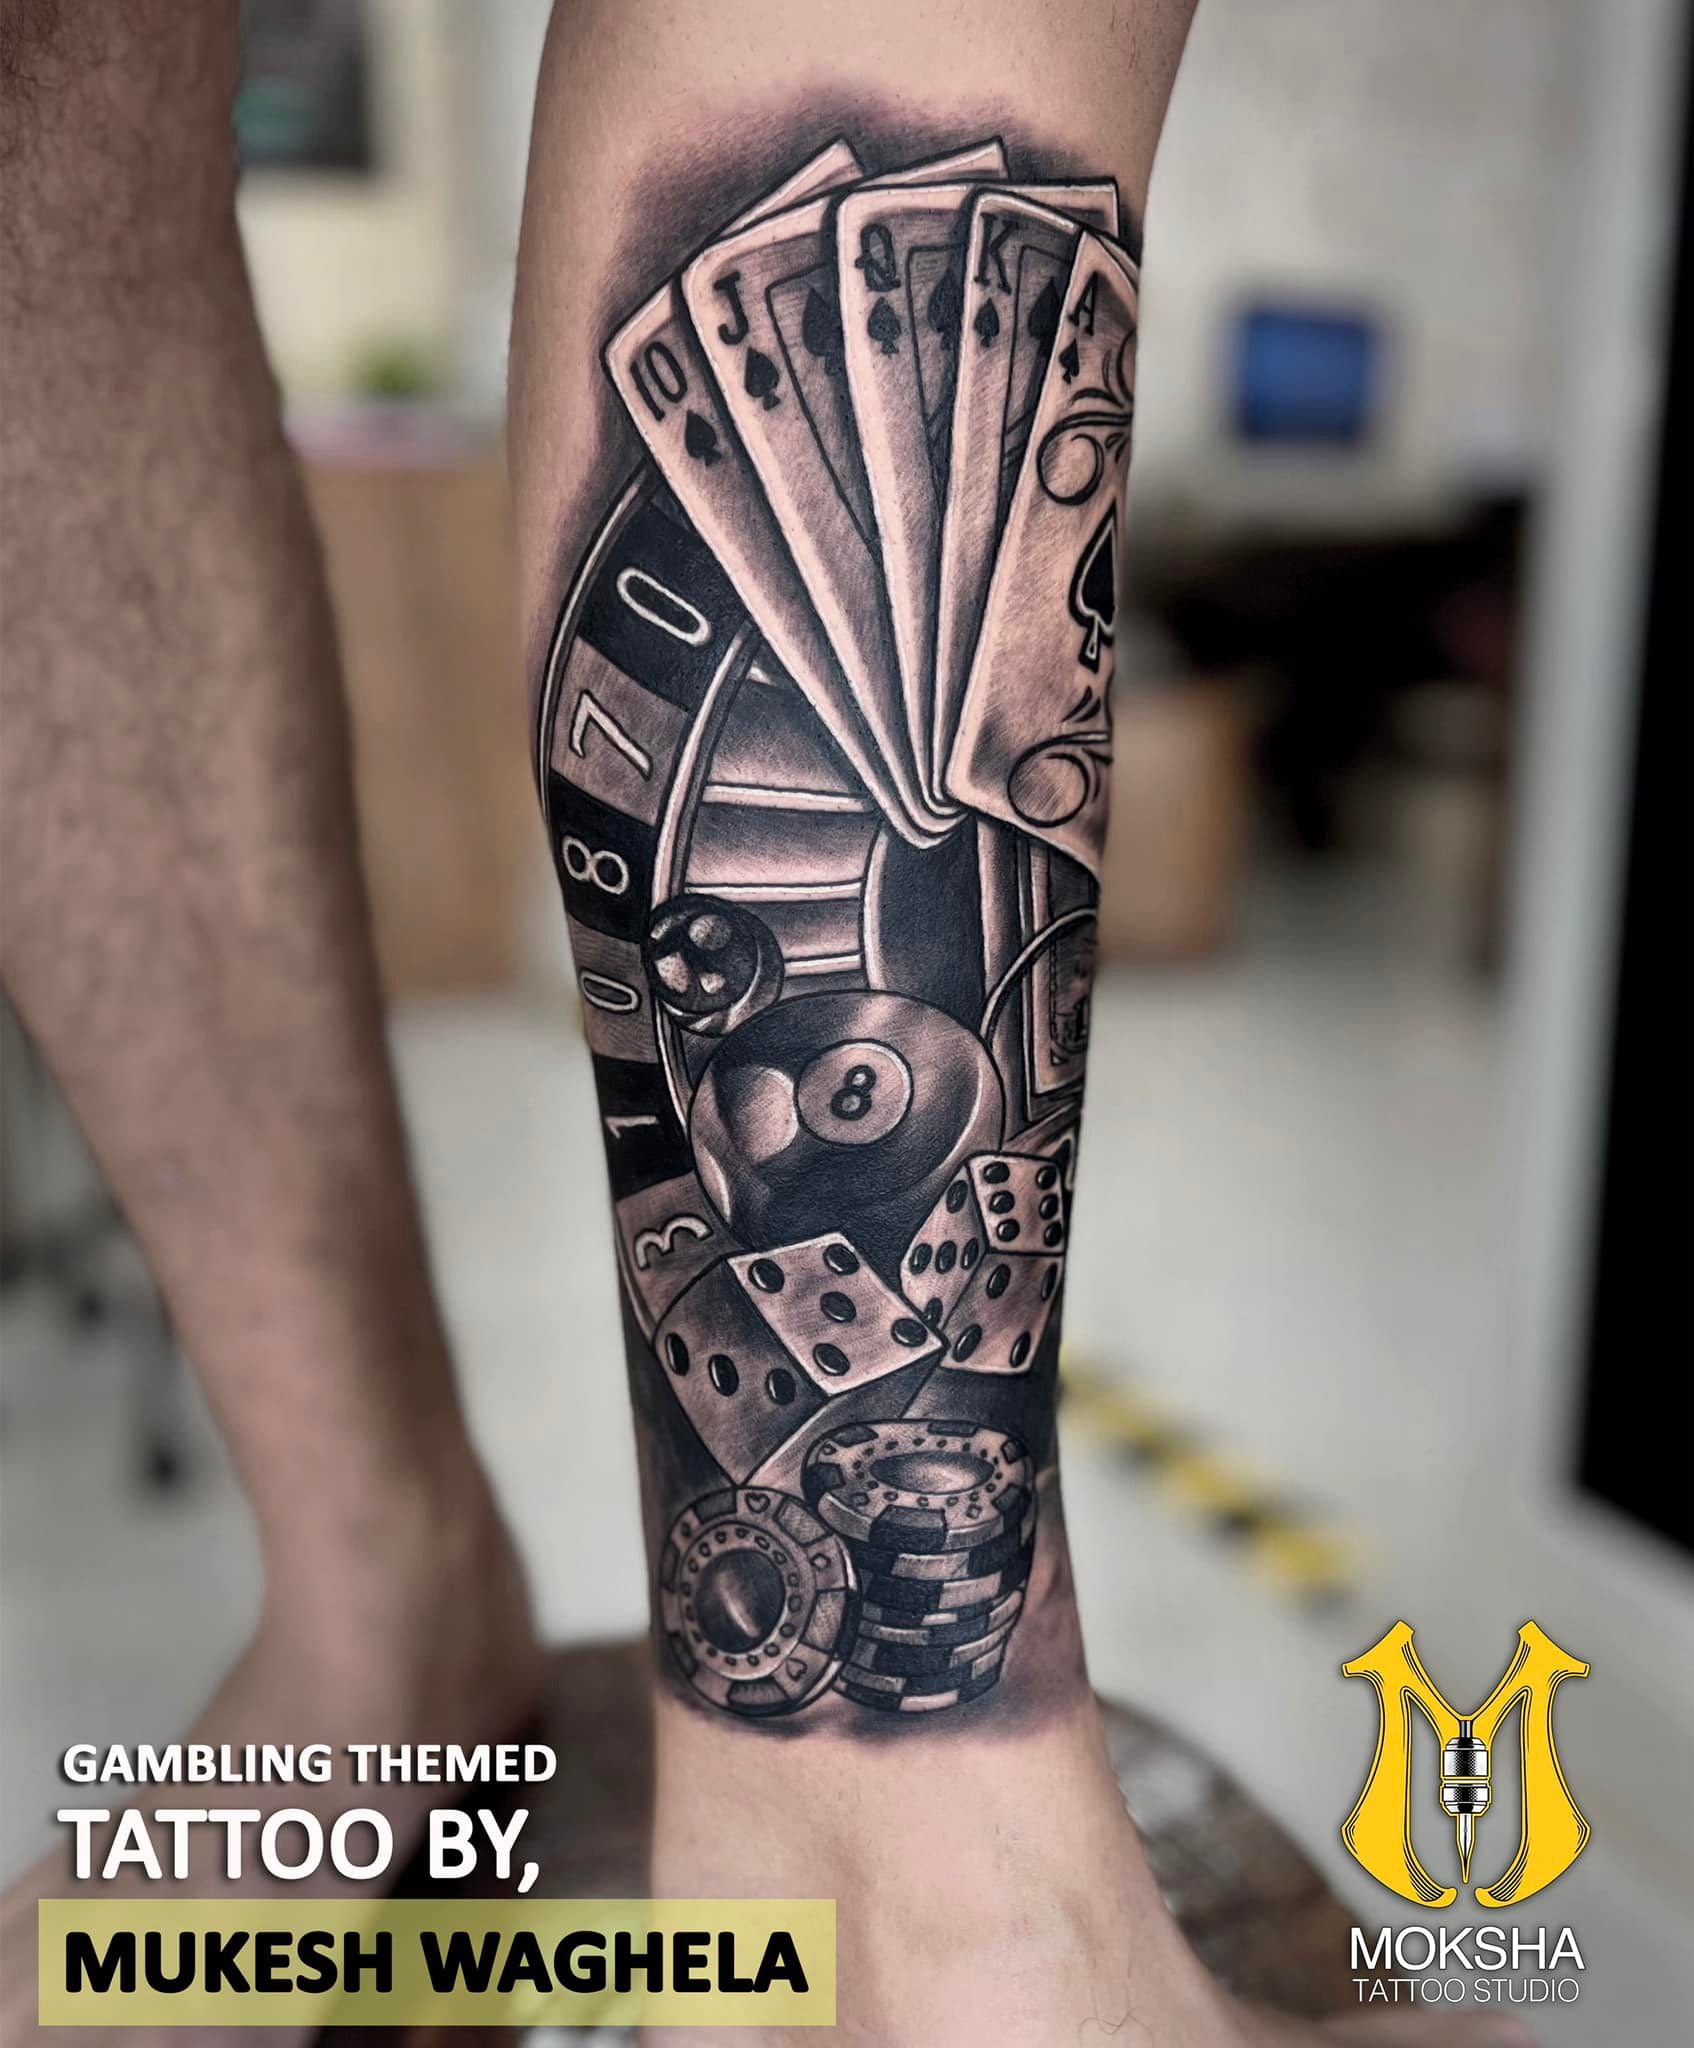 Tattoo Shop Etiquette: How To Be A Great Client • Tattoodo